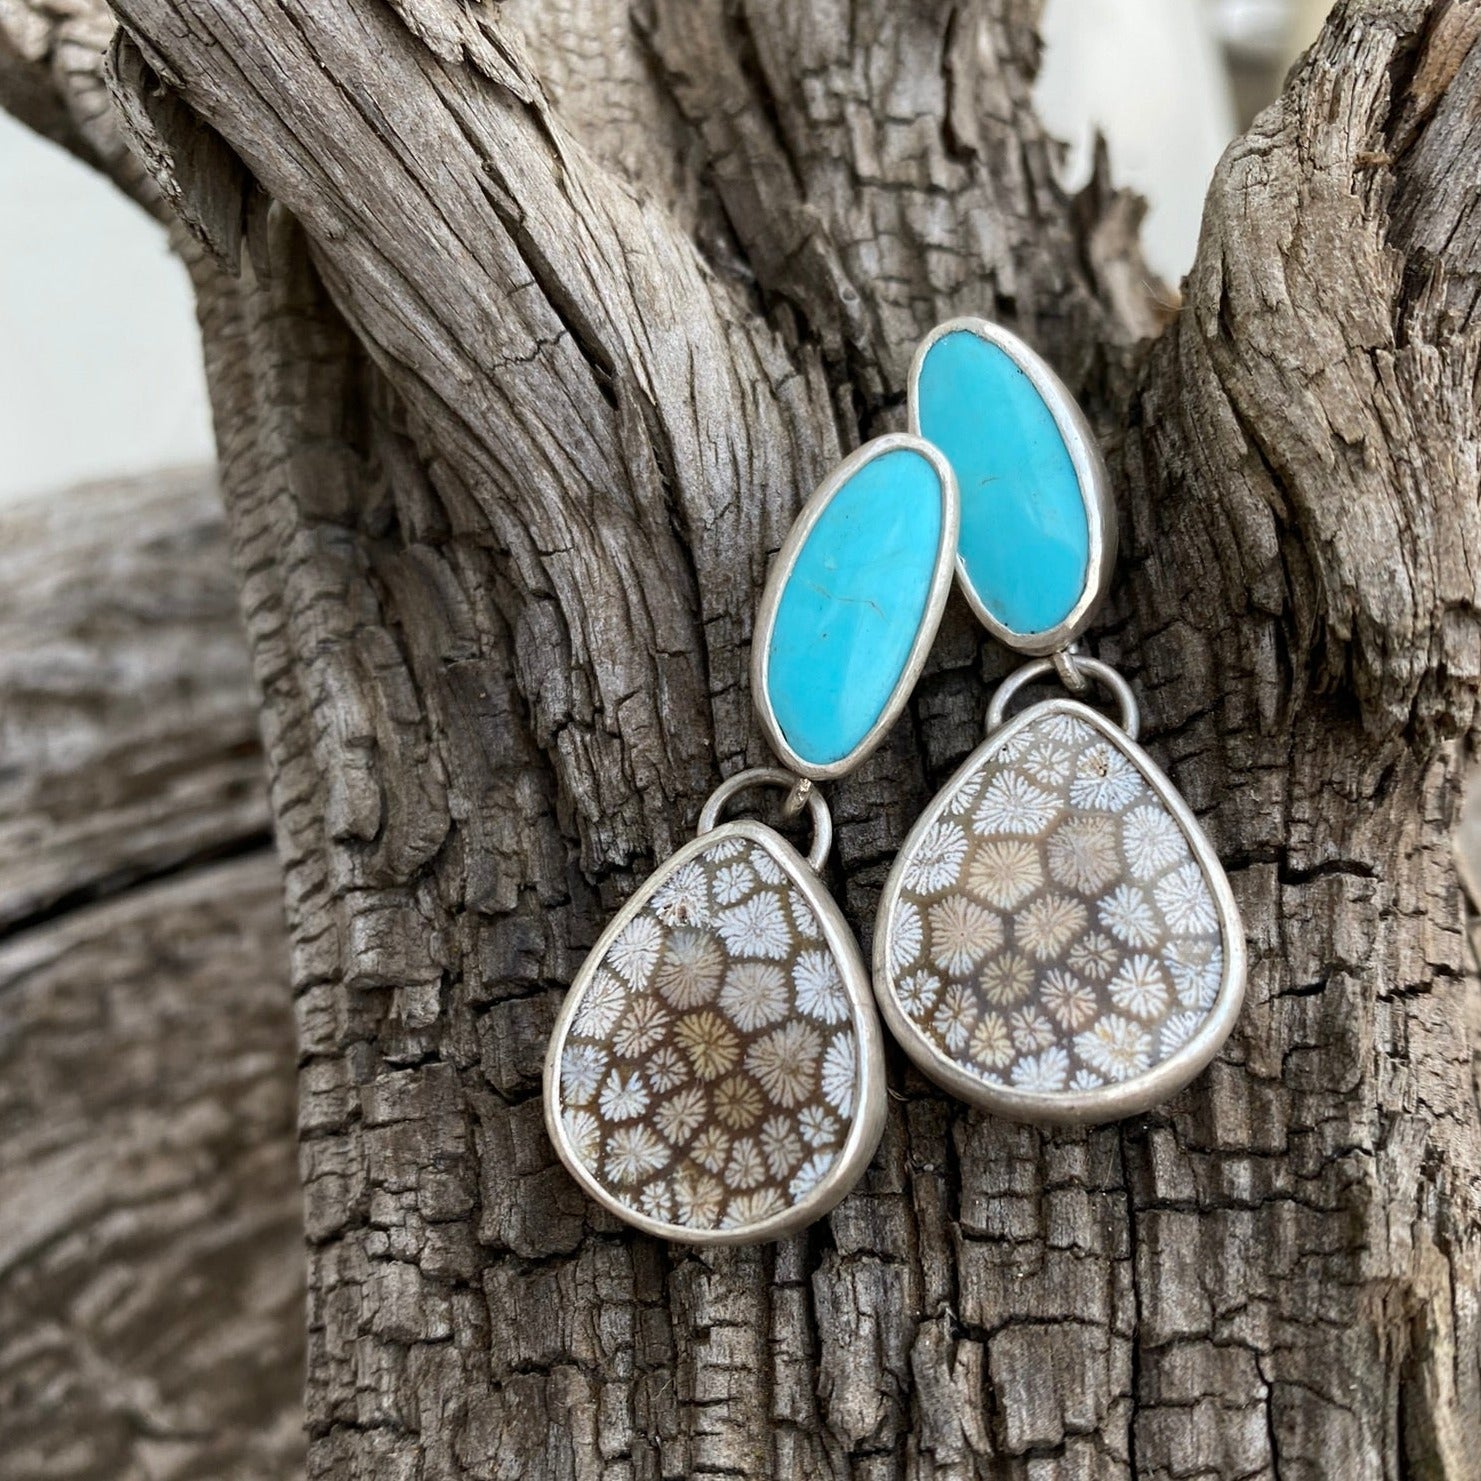 Fossil Coral and Turquoise Earrings